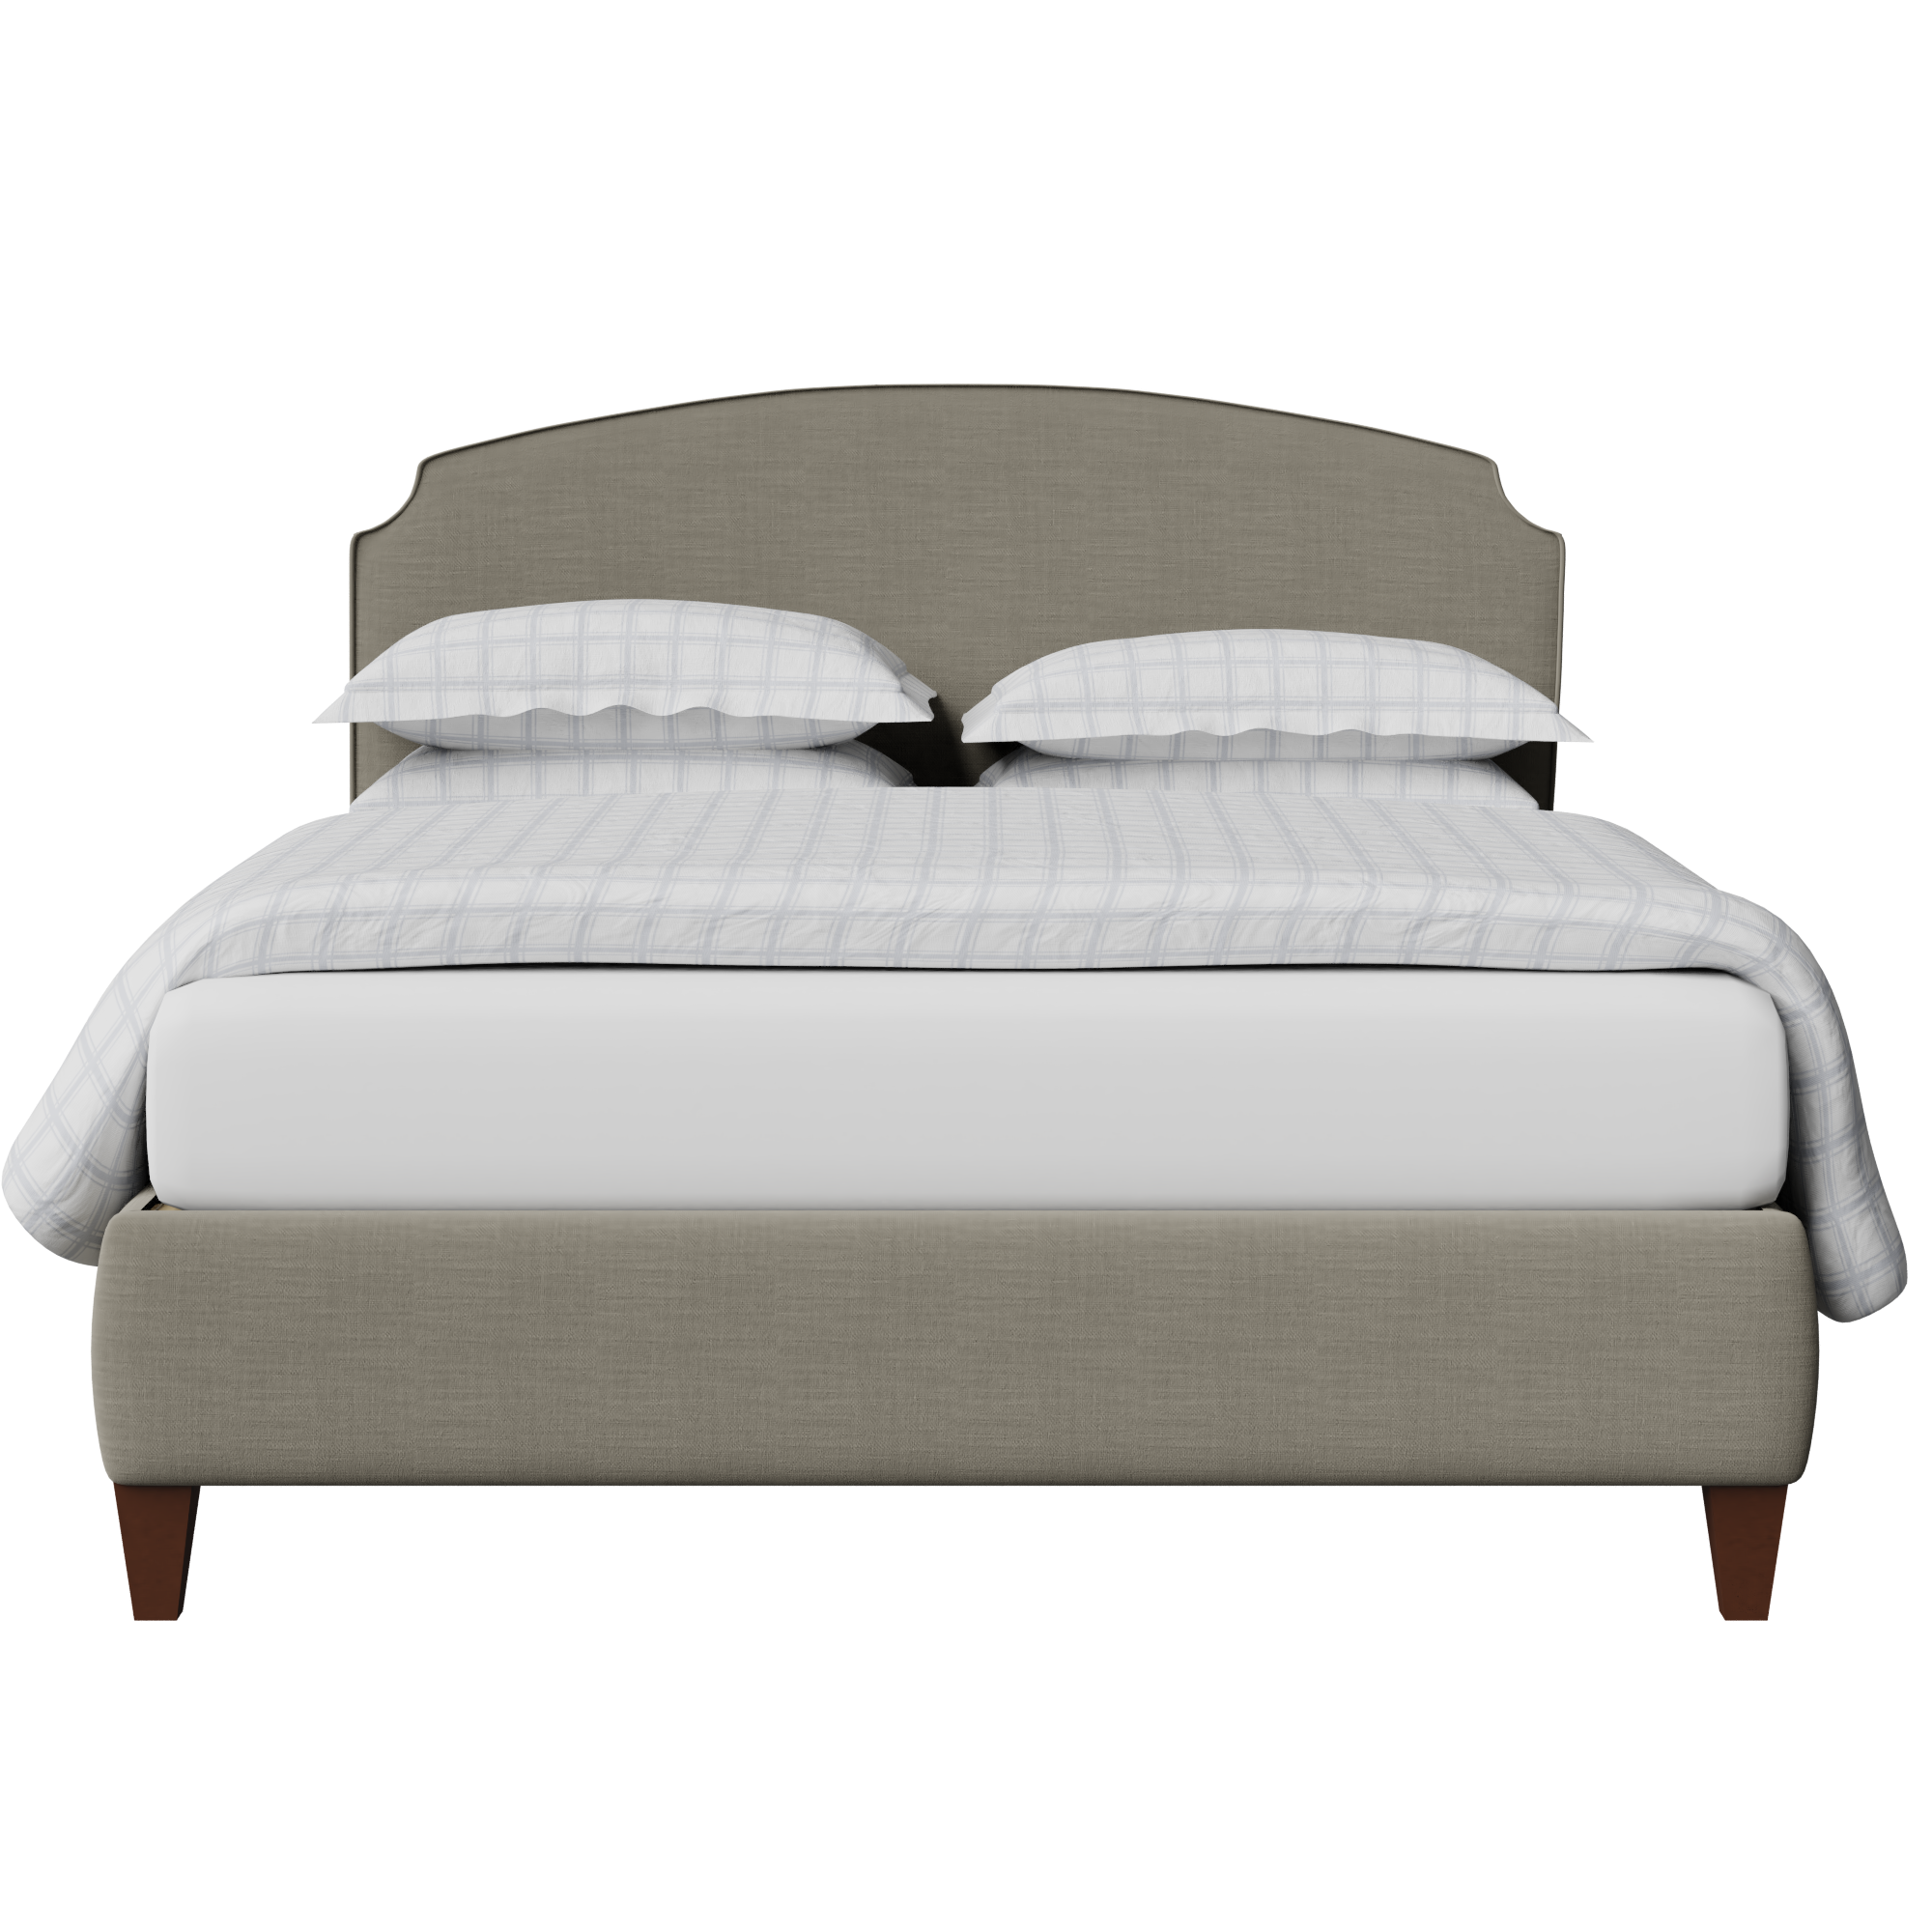 Lide with Piping stoffen bed in grijs